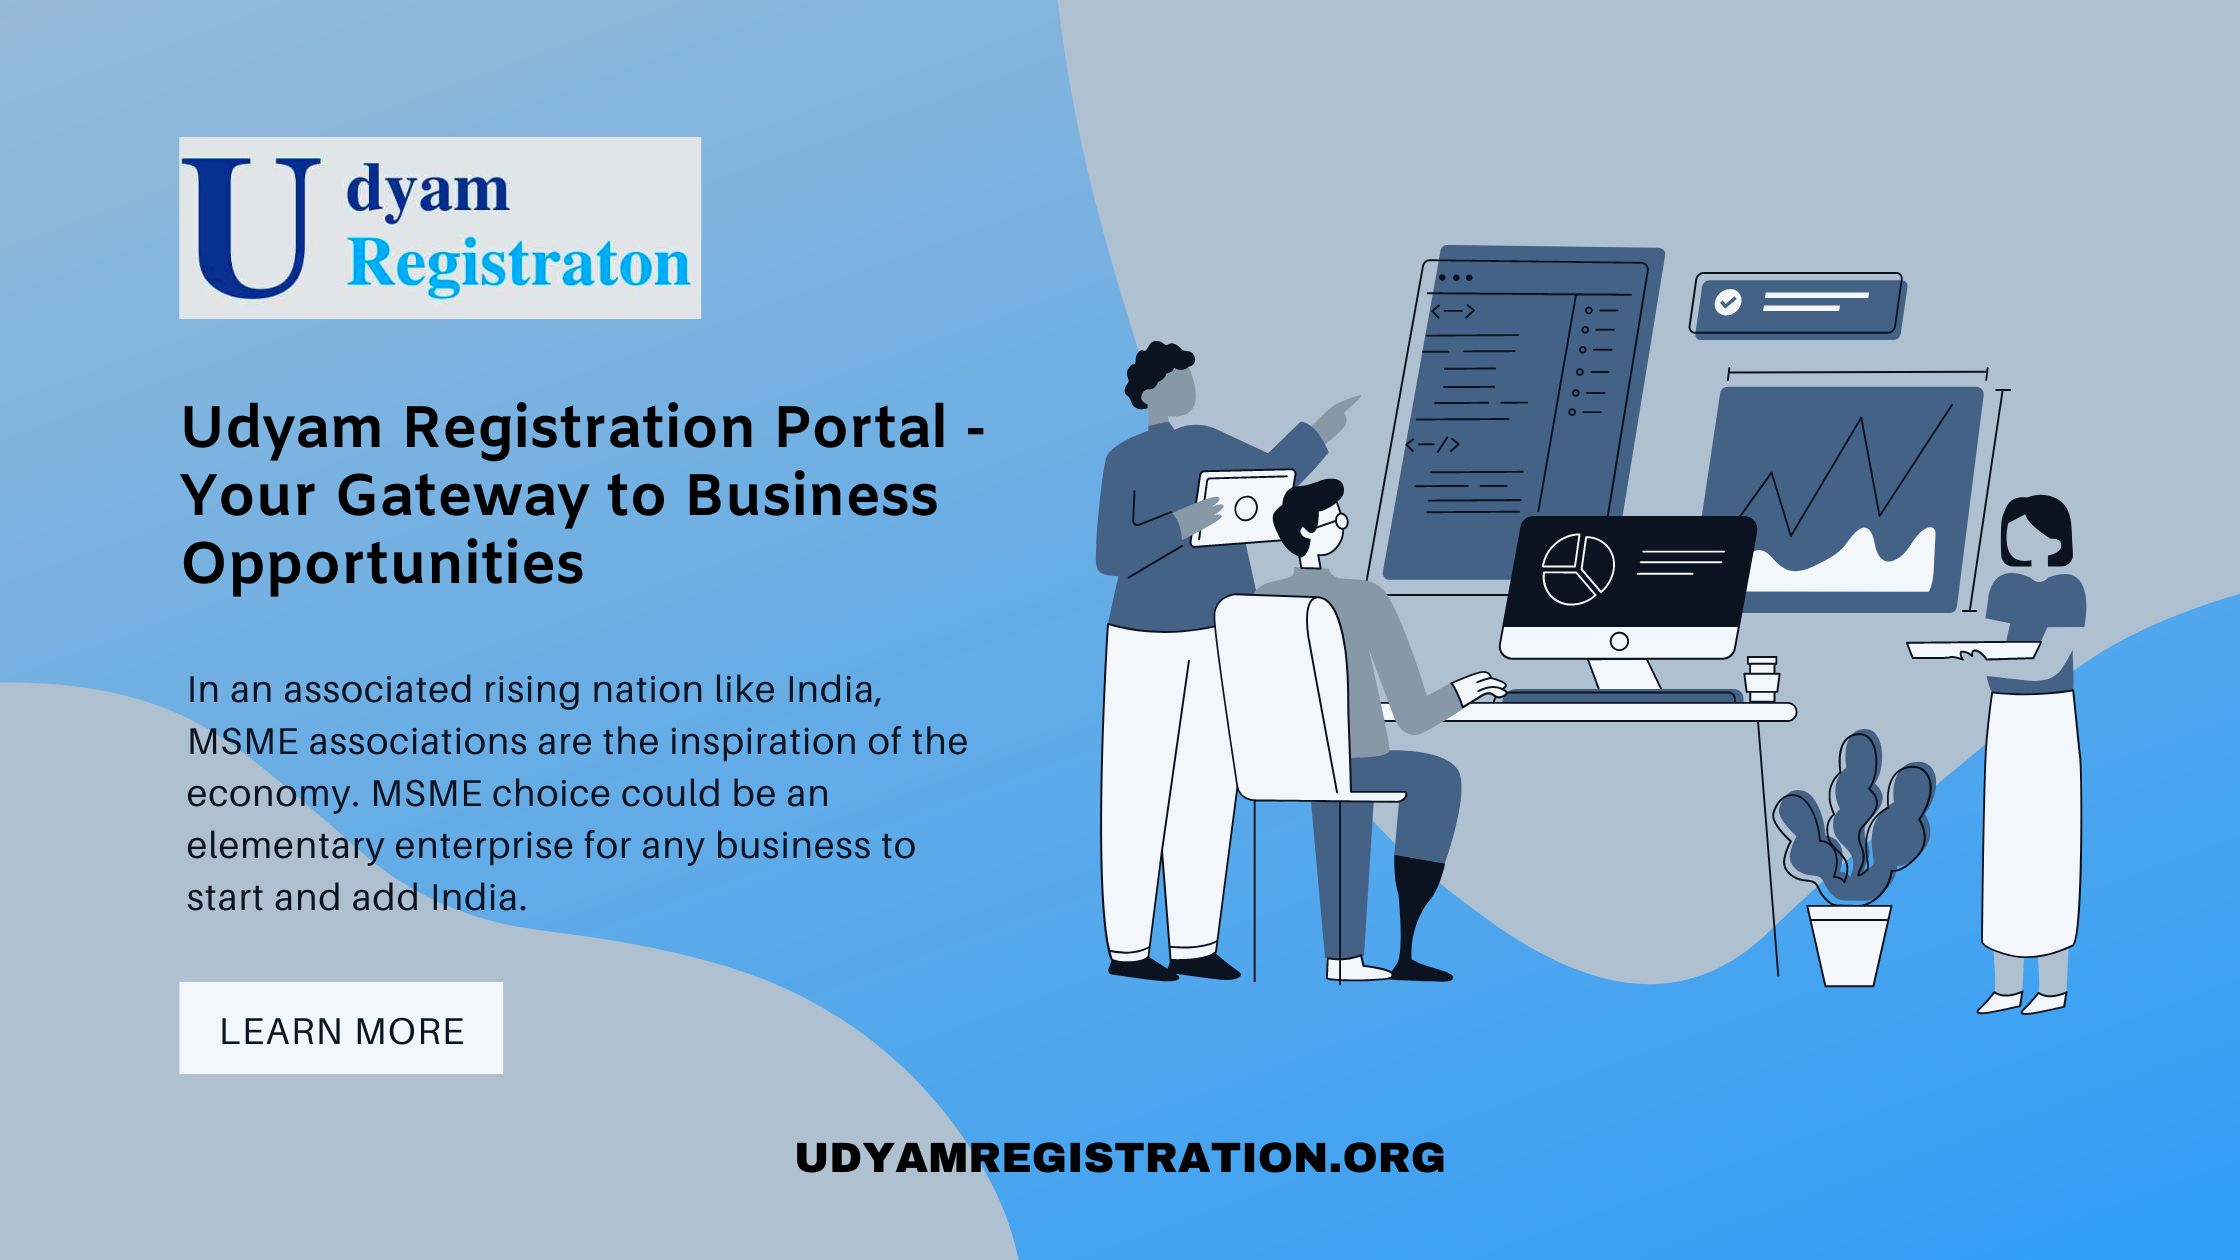 Udyam Registration Portal - Your Gateway to Business Opportunities